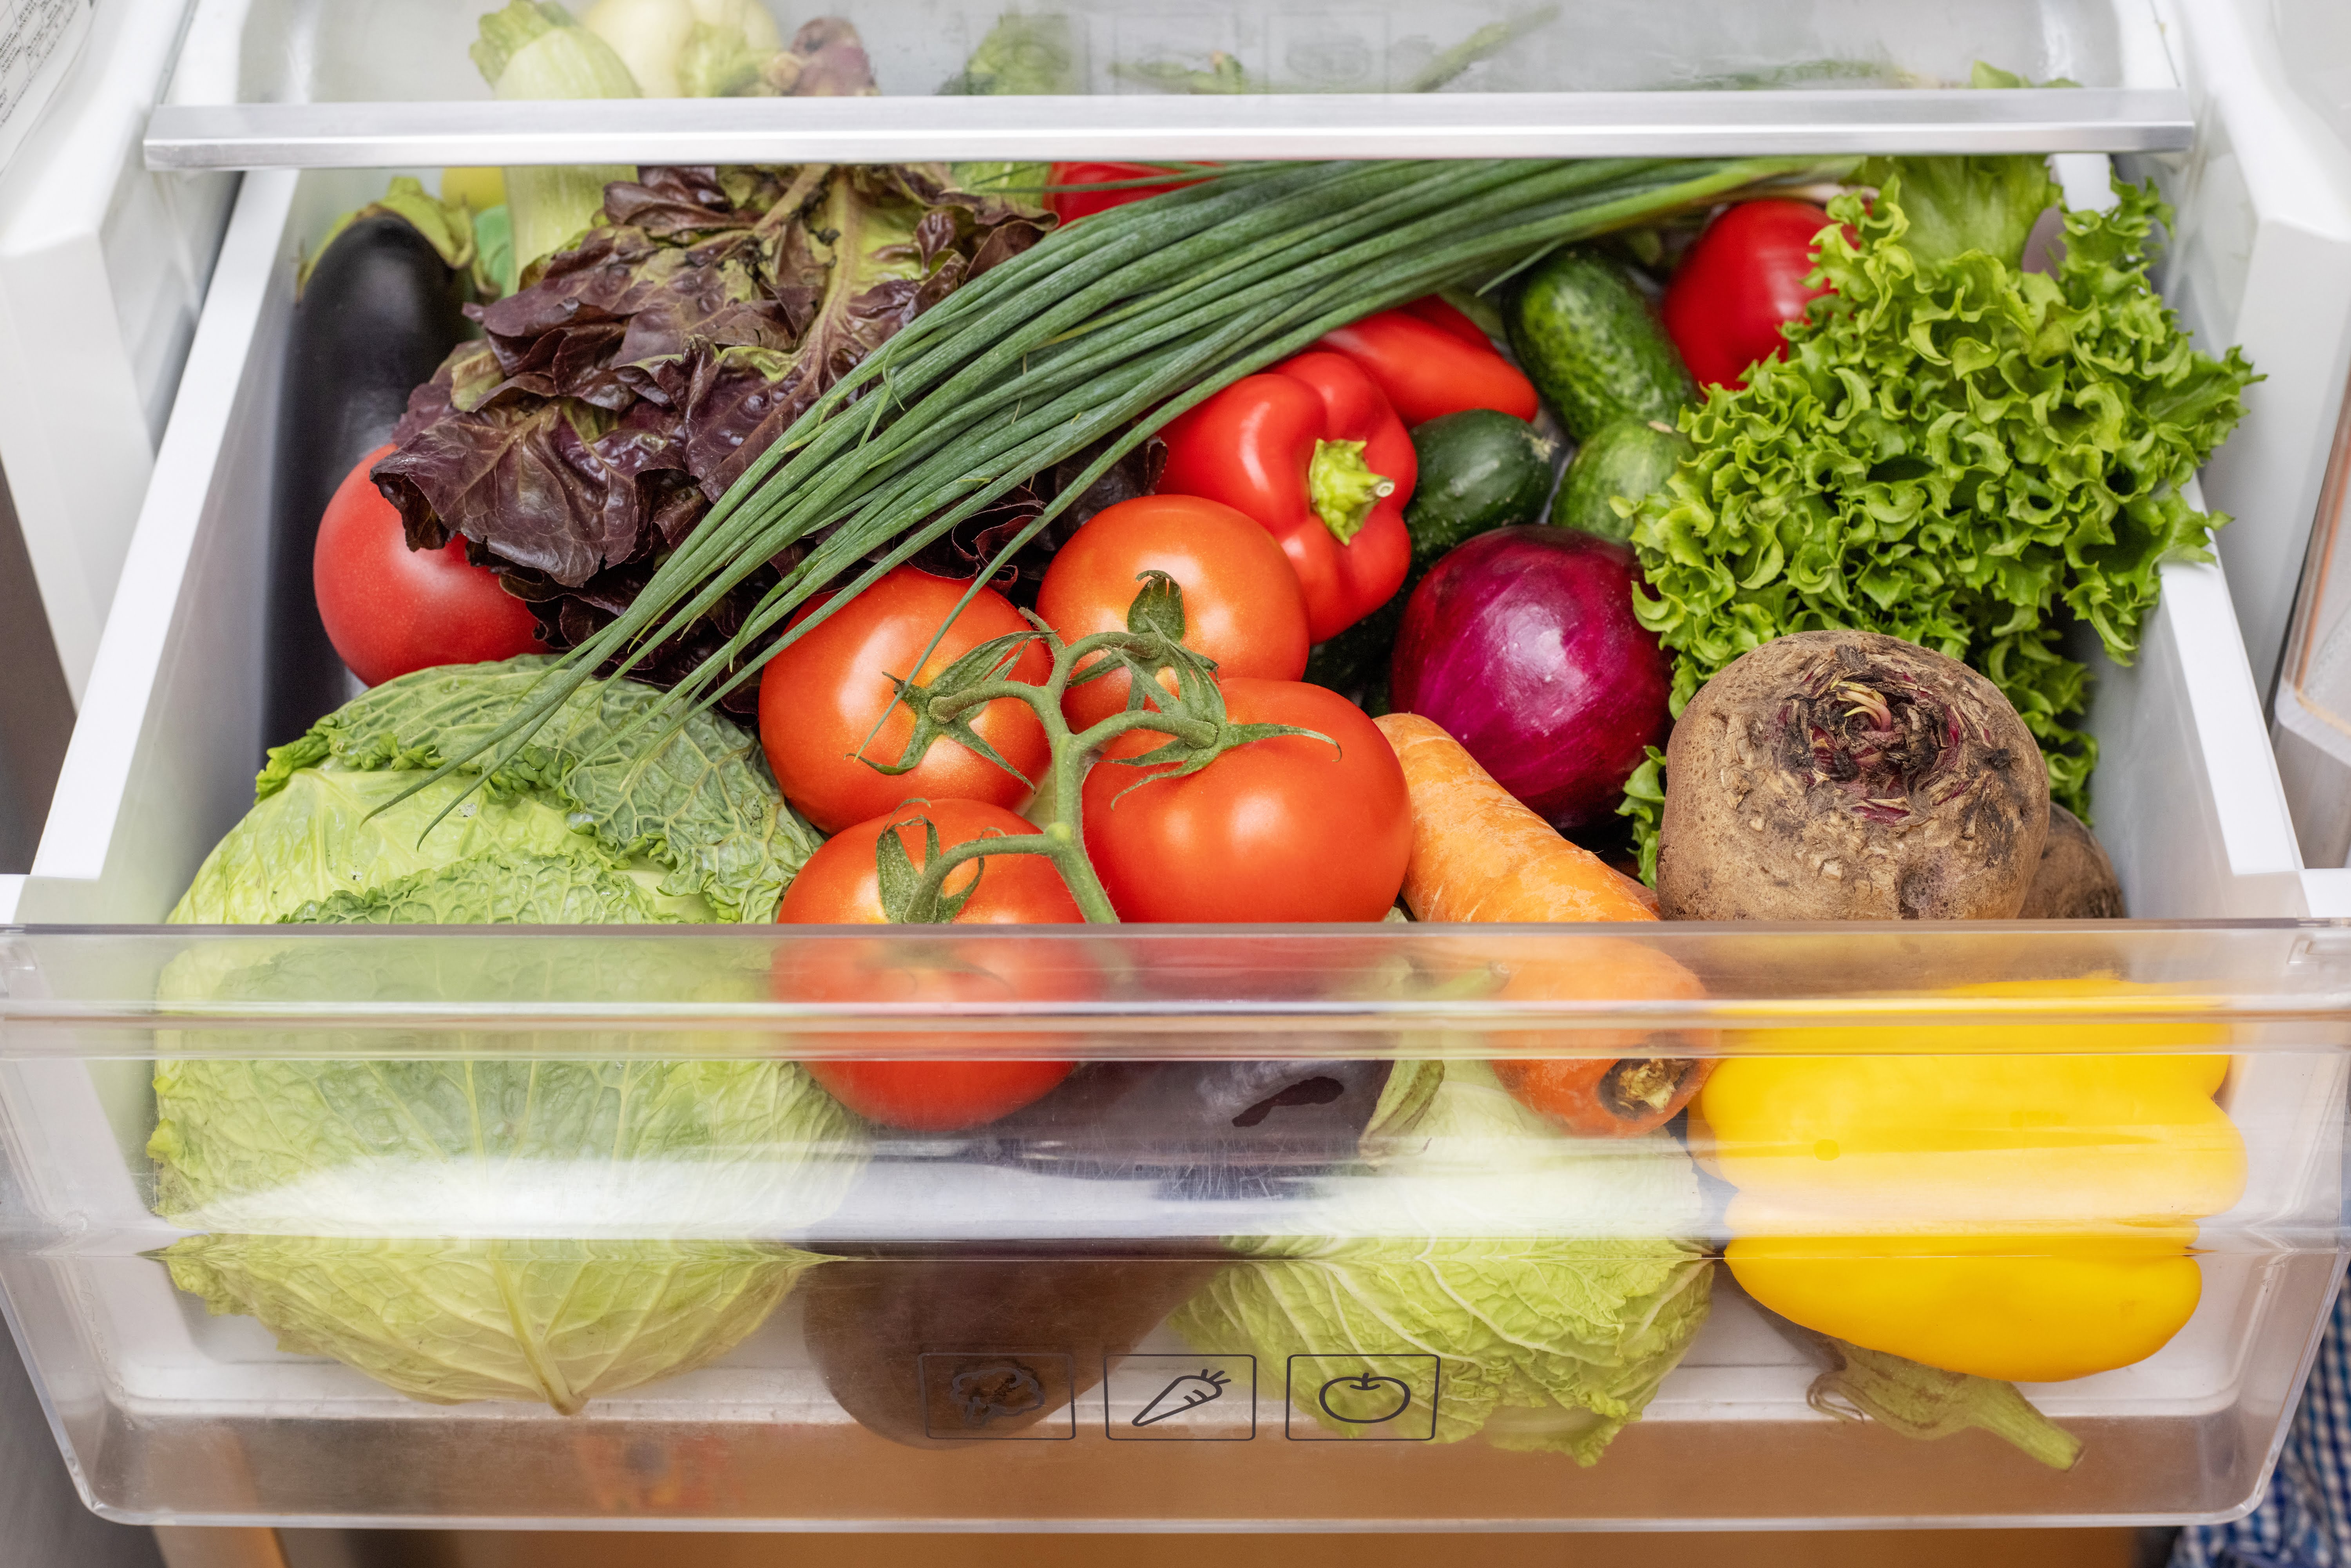 Featured image for “How to Properly Store Produce to Prevent Food Waste”